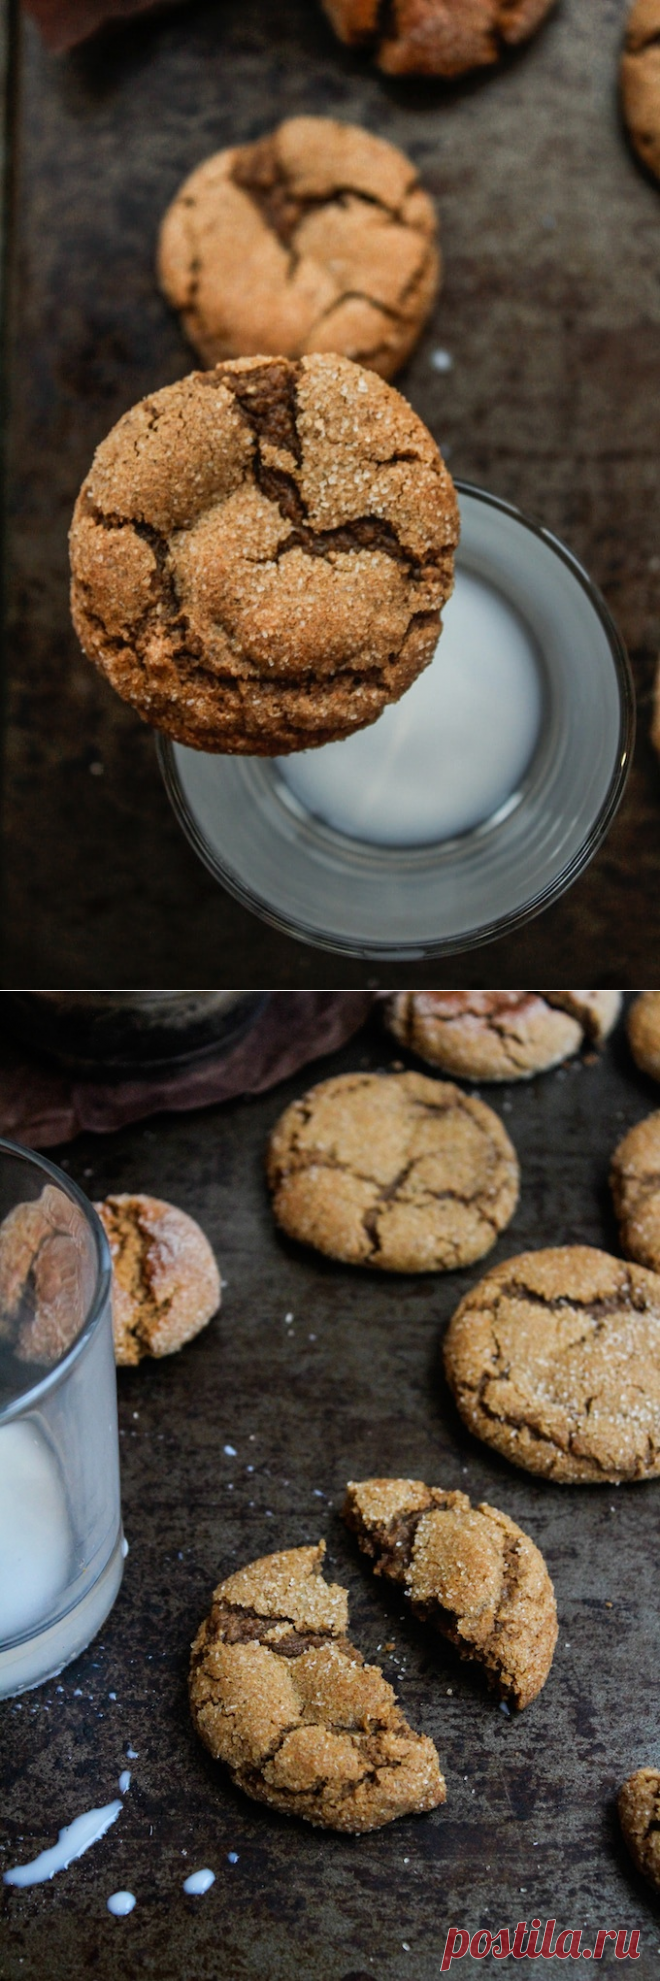 Cardamom Spiced Ginger Cookies - A Saucy Kitchen